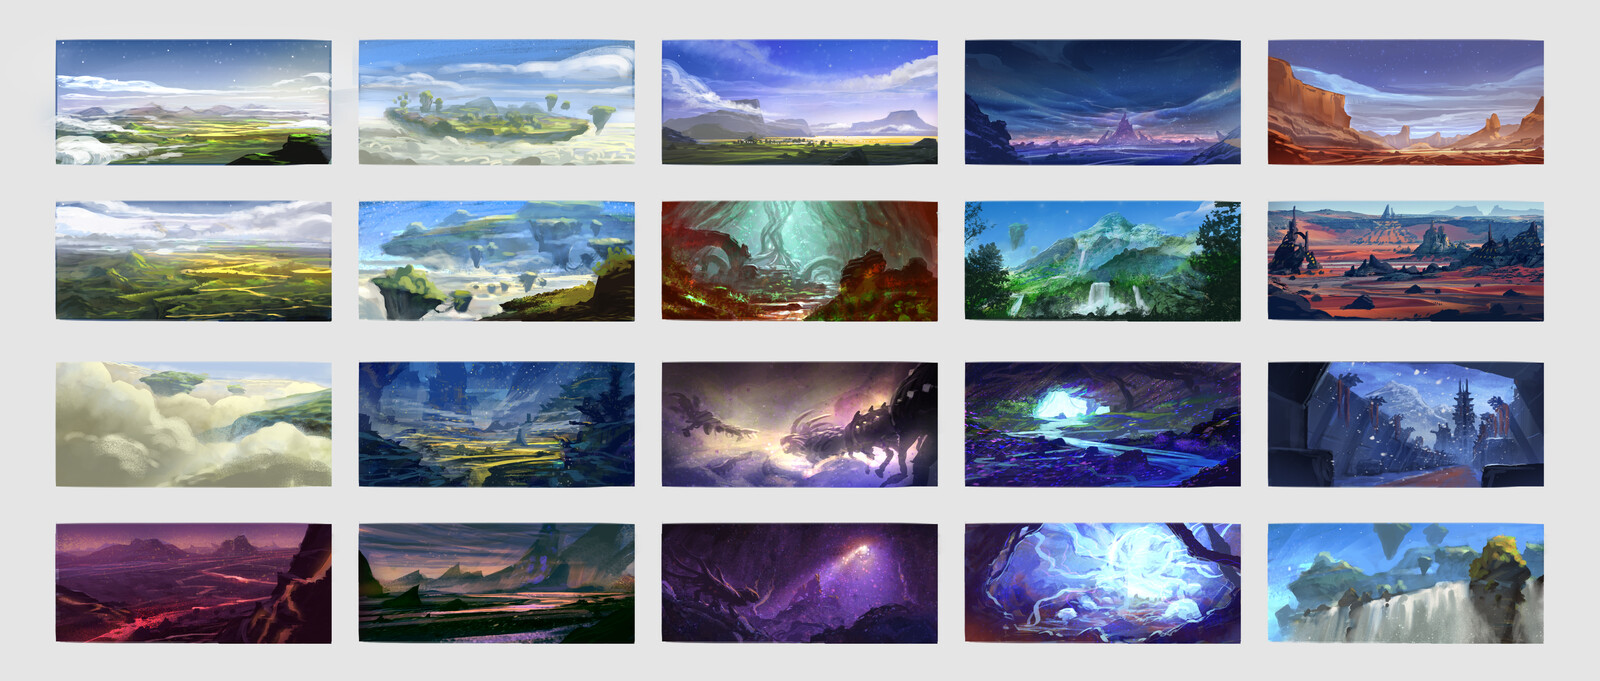 Early color thumbnails